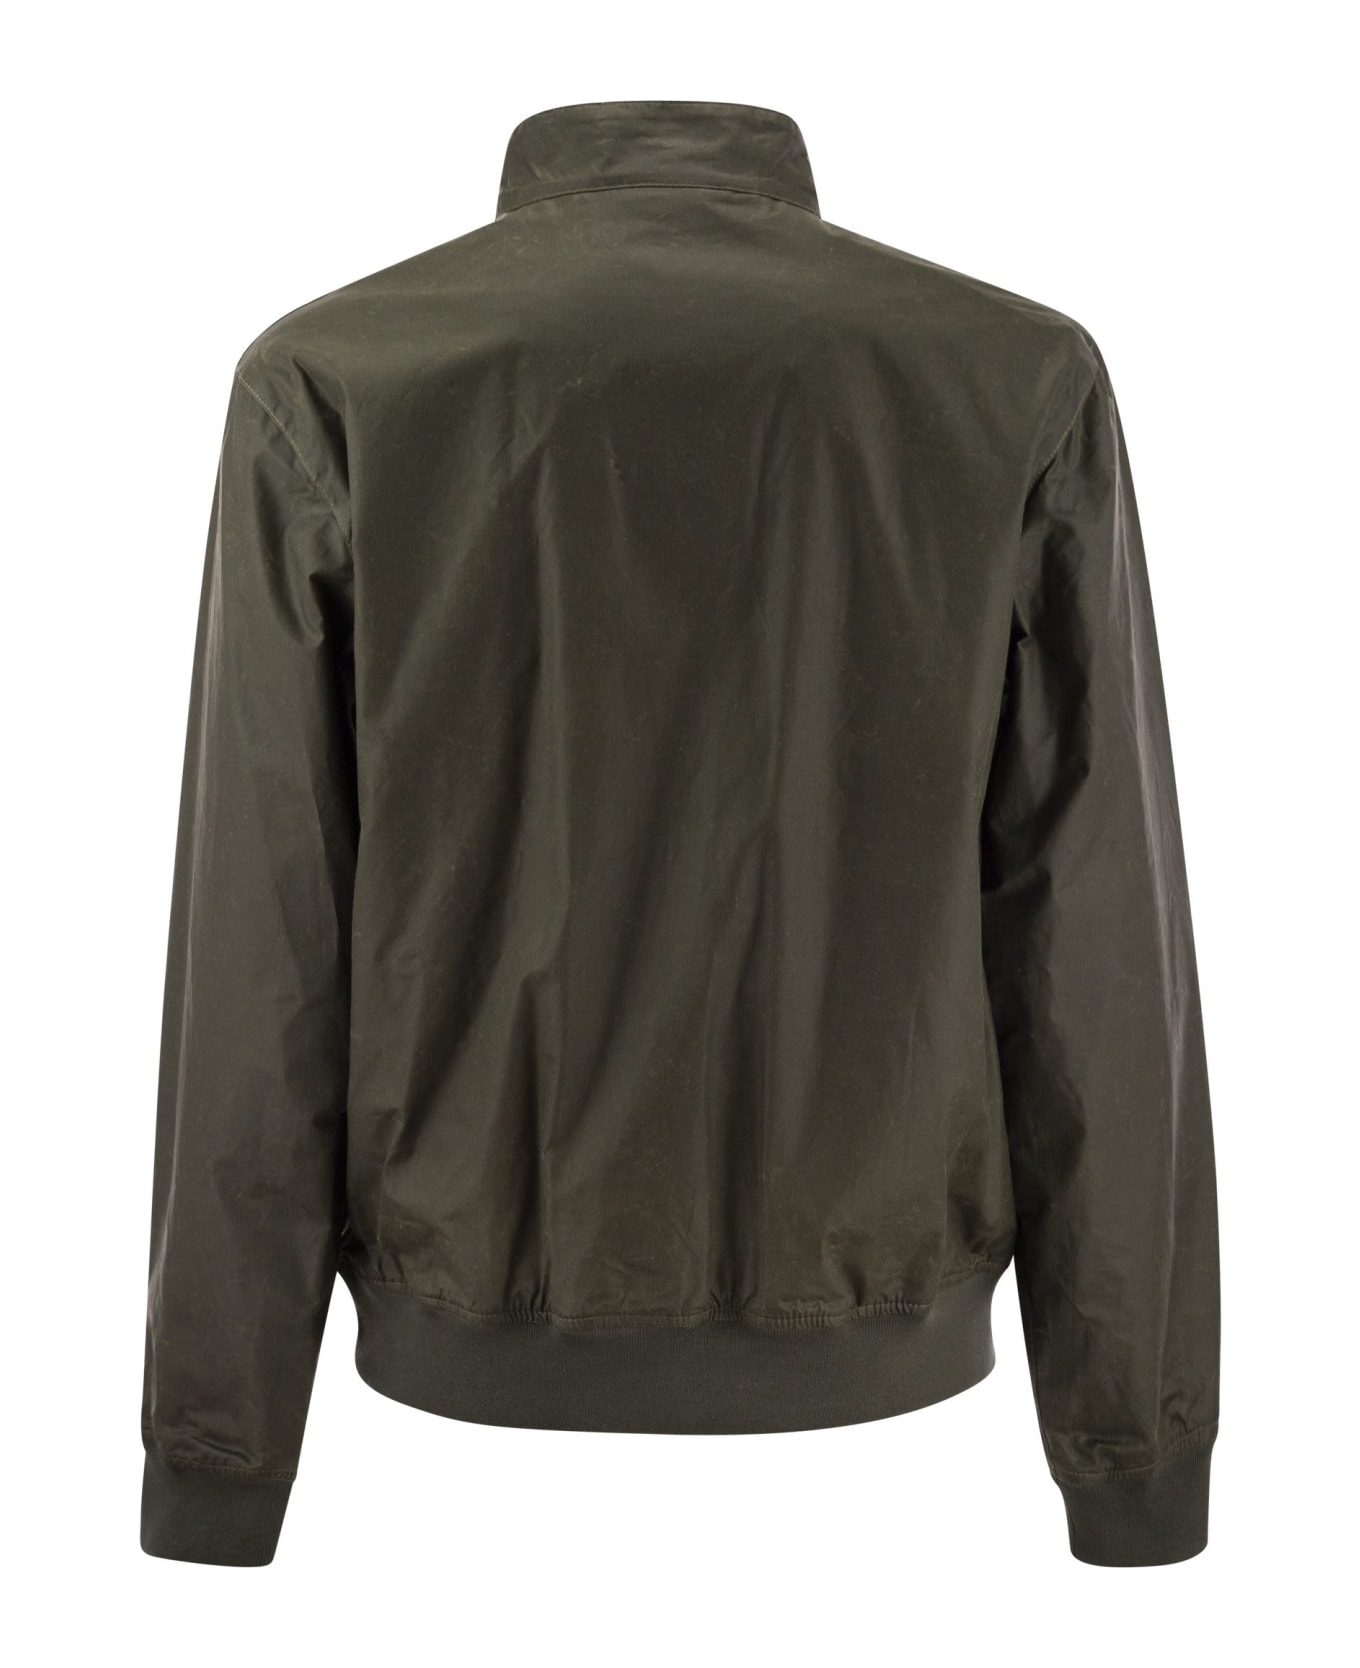 Barbour Royston - Lightweight Waxed Cotton Jacket - Olive Green